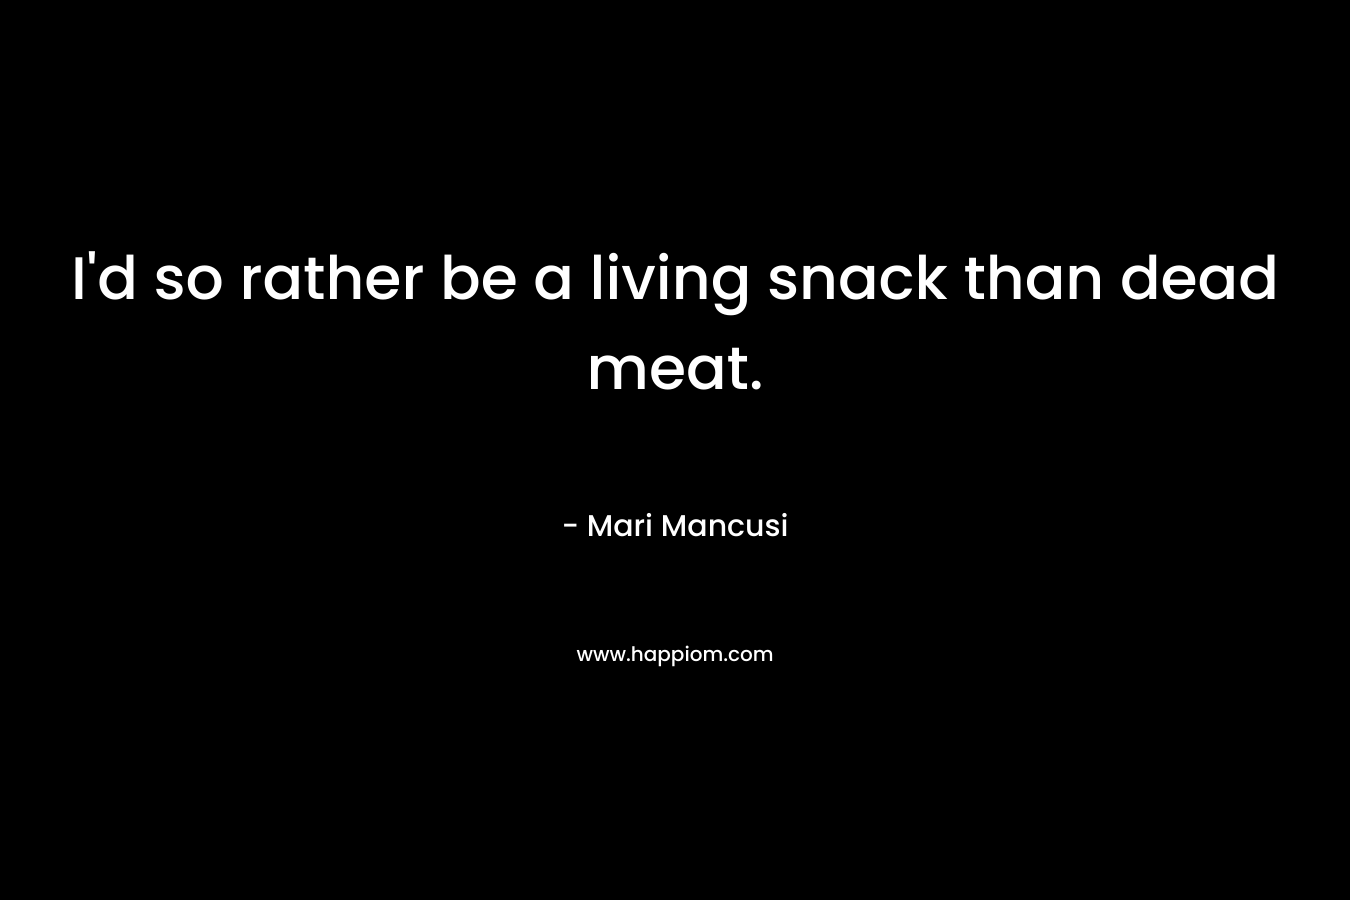 I’d so rather be a living snack than dead meat. – Mari Mancusi